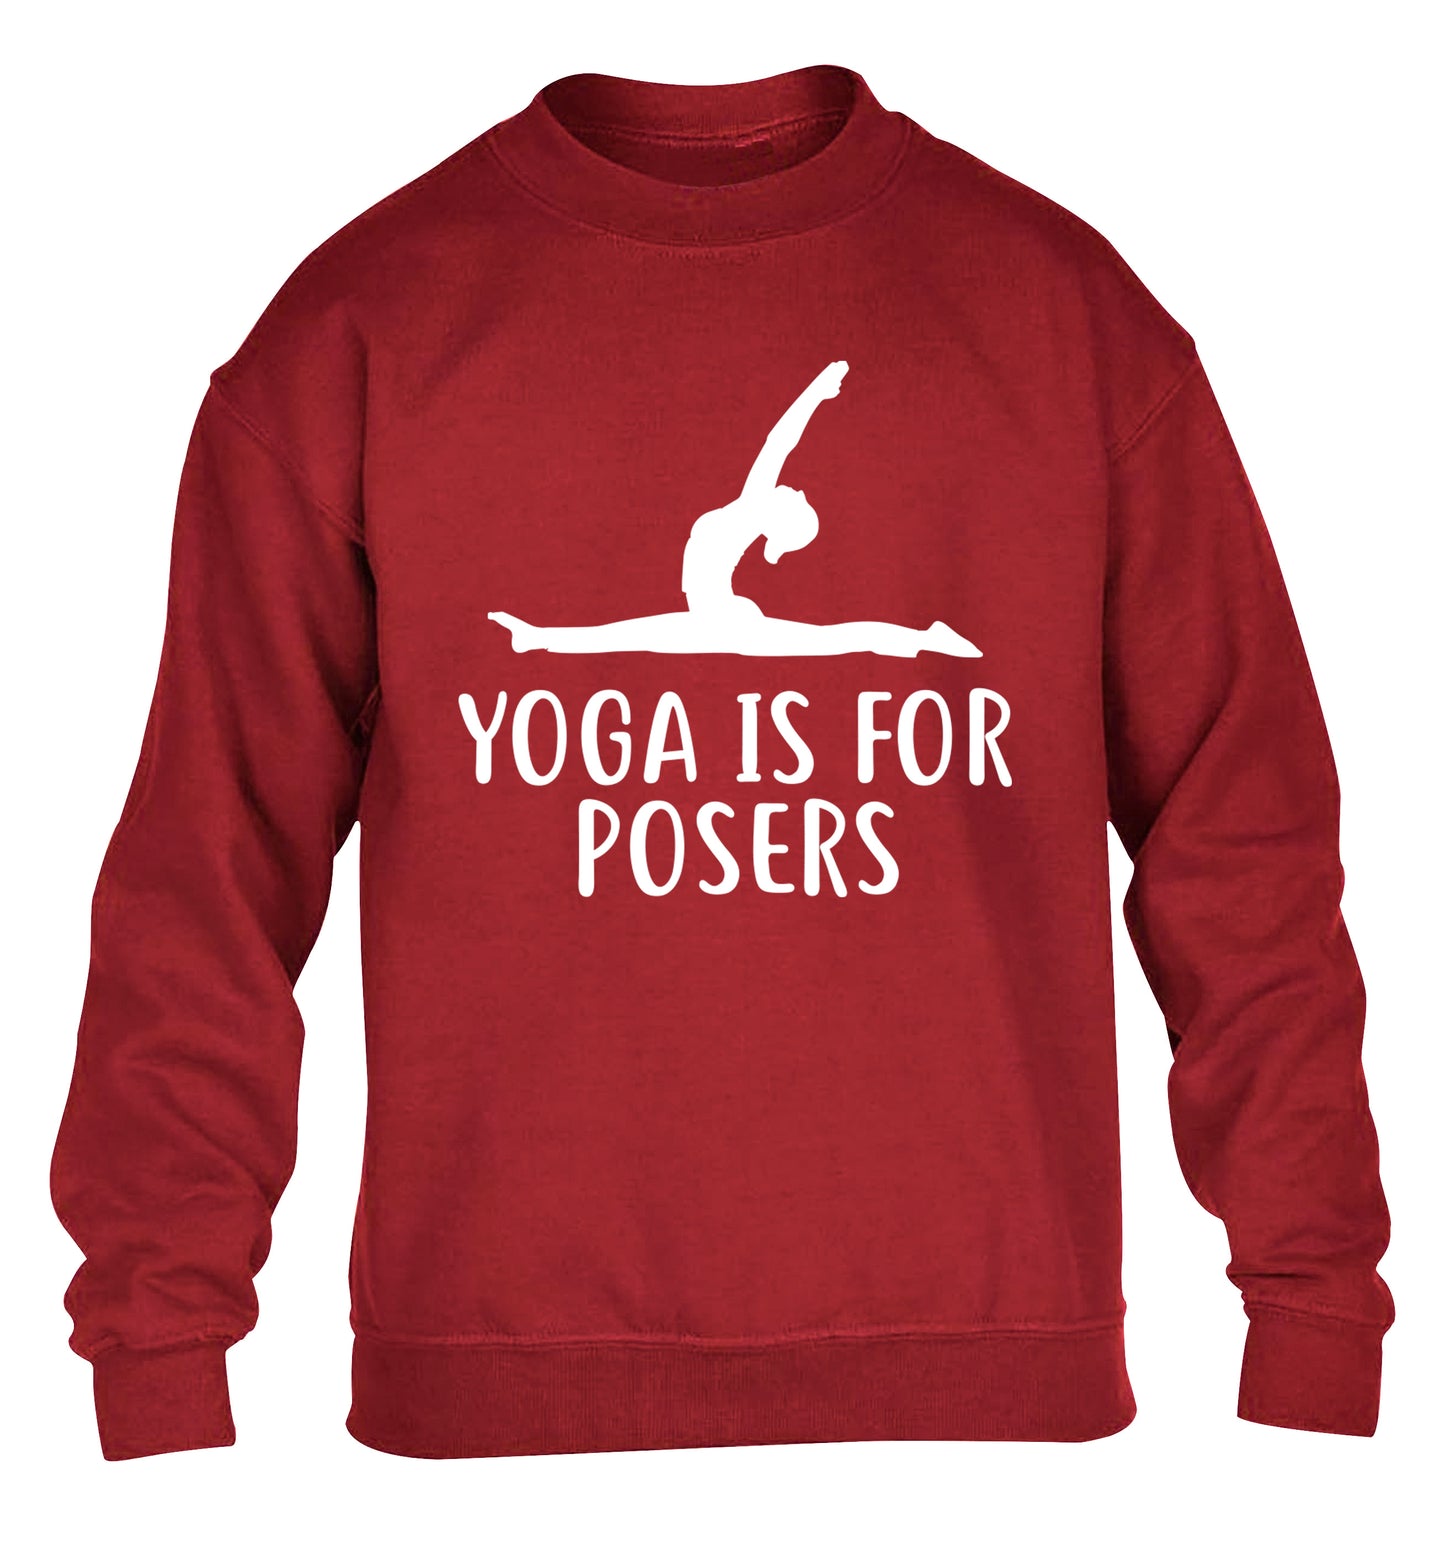 Yoga is for posers children's grey sweater 12-13 Years